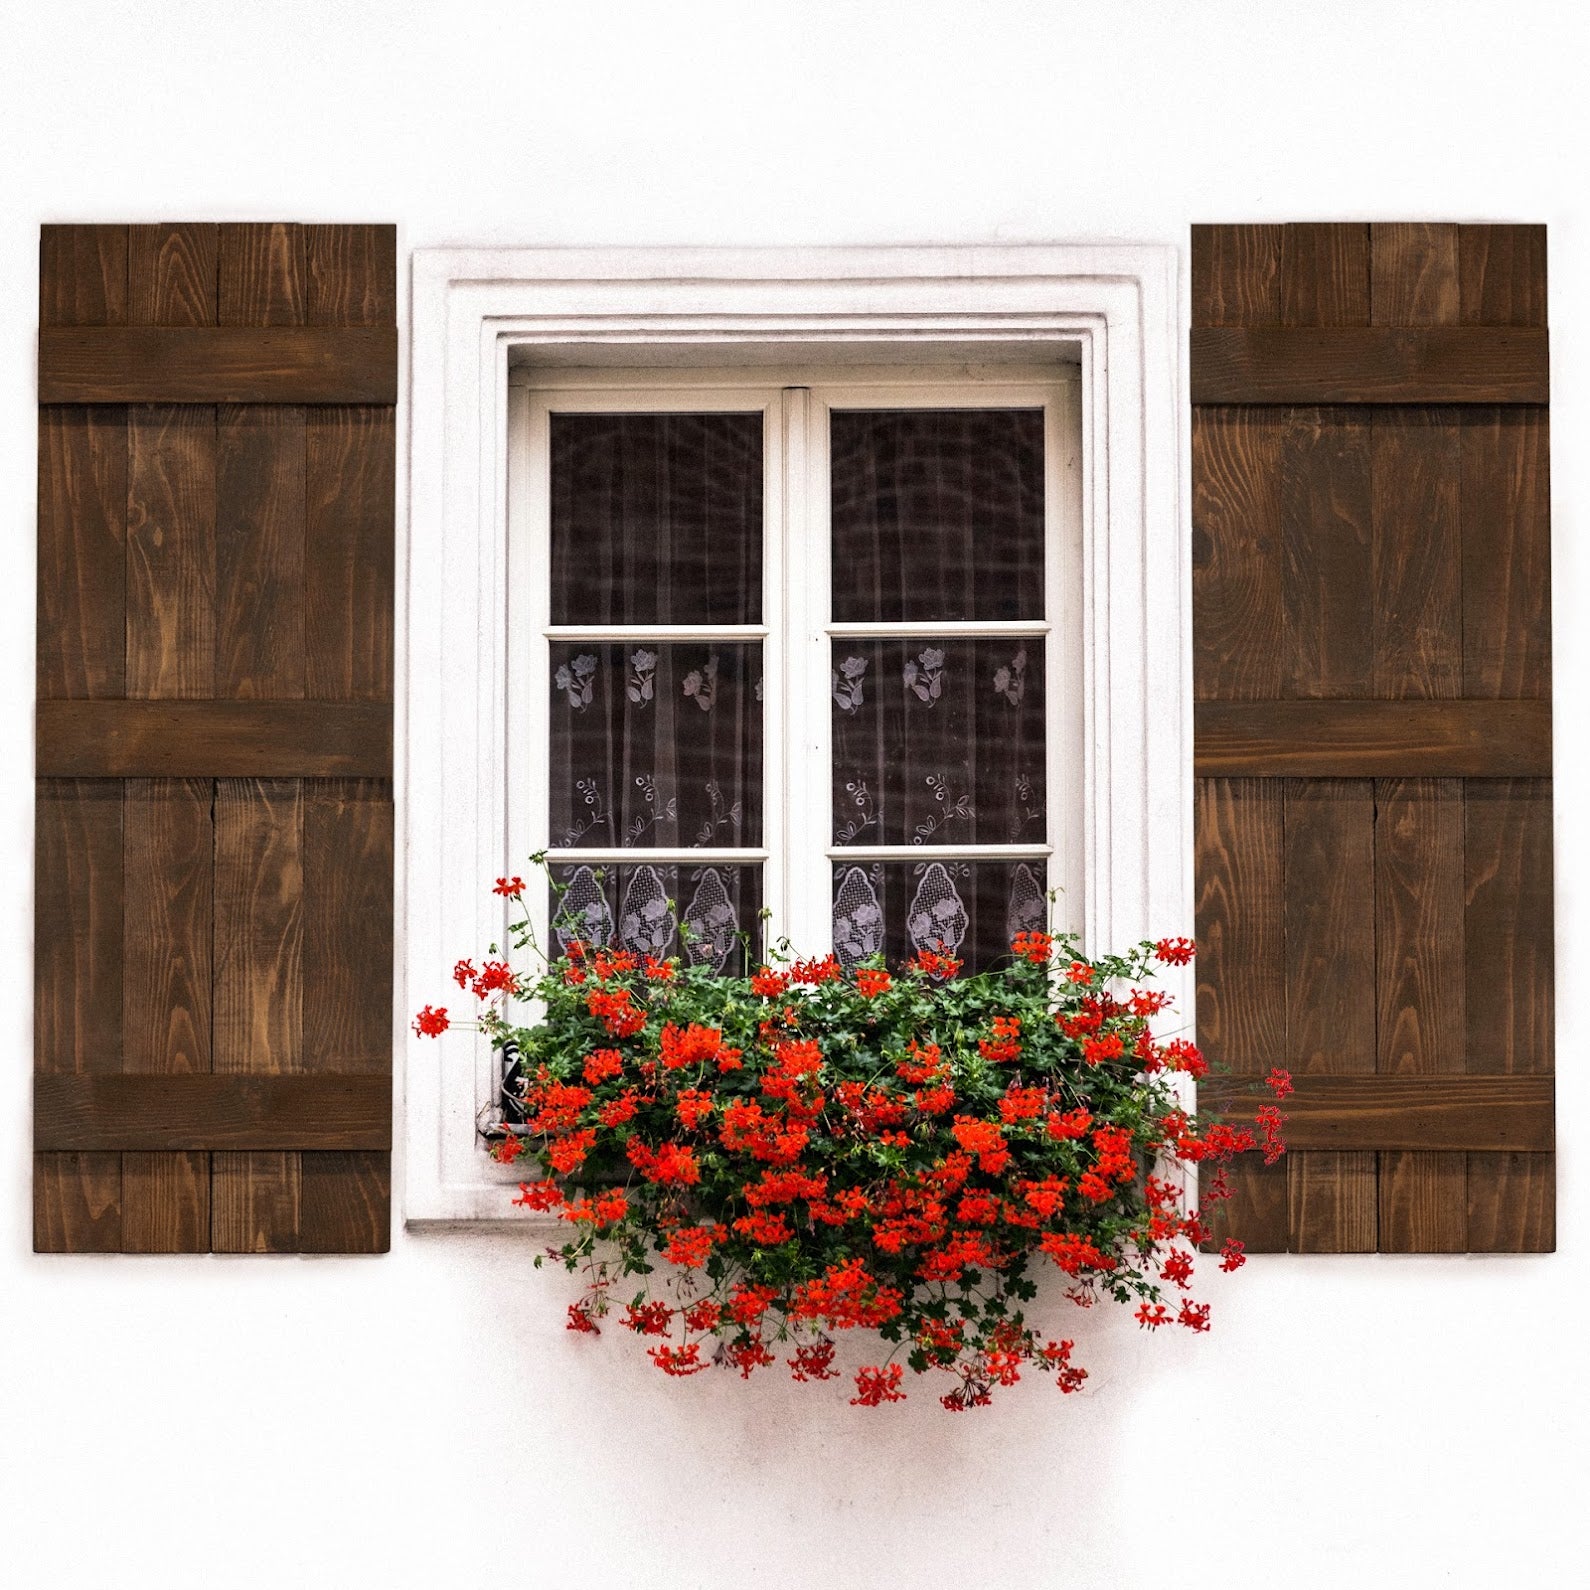 Dogberry Collections Board and Batten Shutters are Custom, Easy to Install, and Built to Last